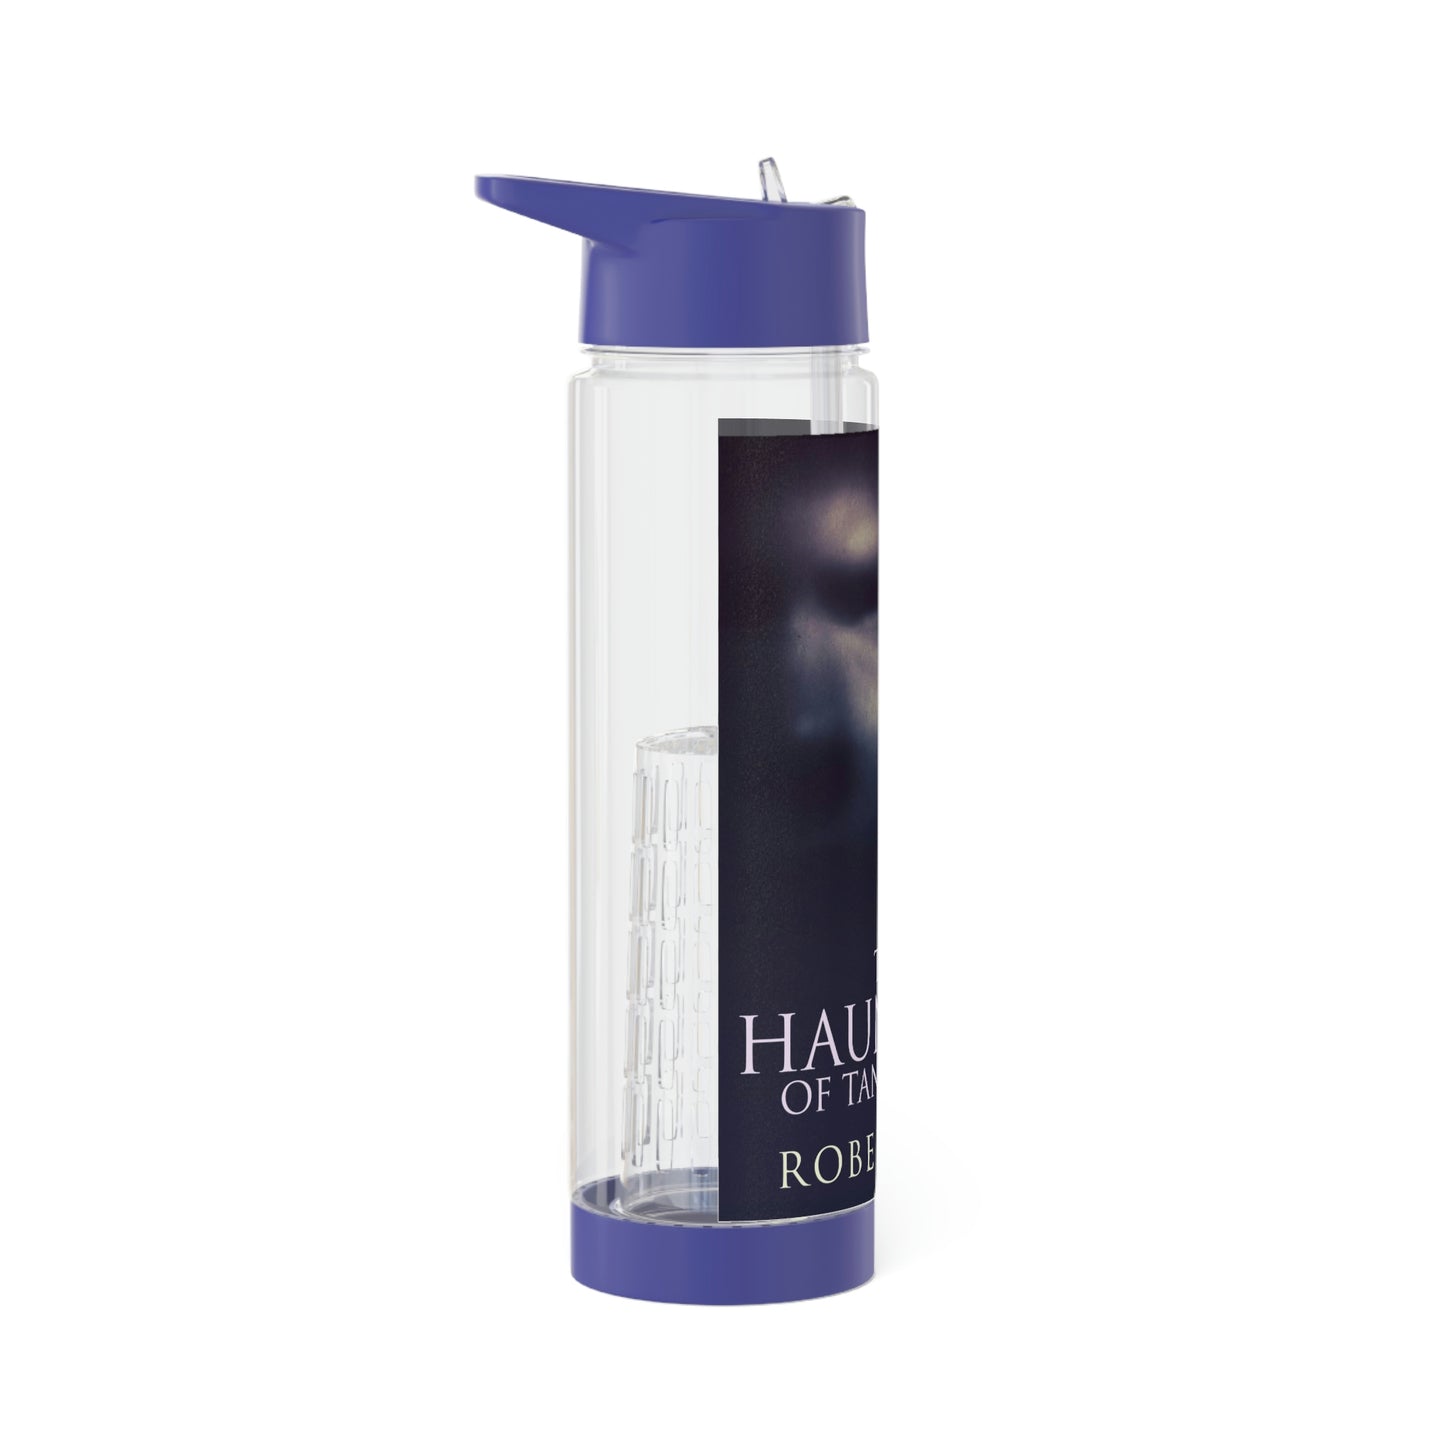 The Haunting Of Tana Grant - Infuser Water Bottle